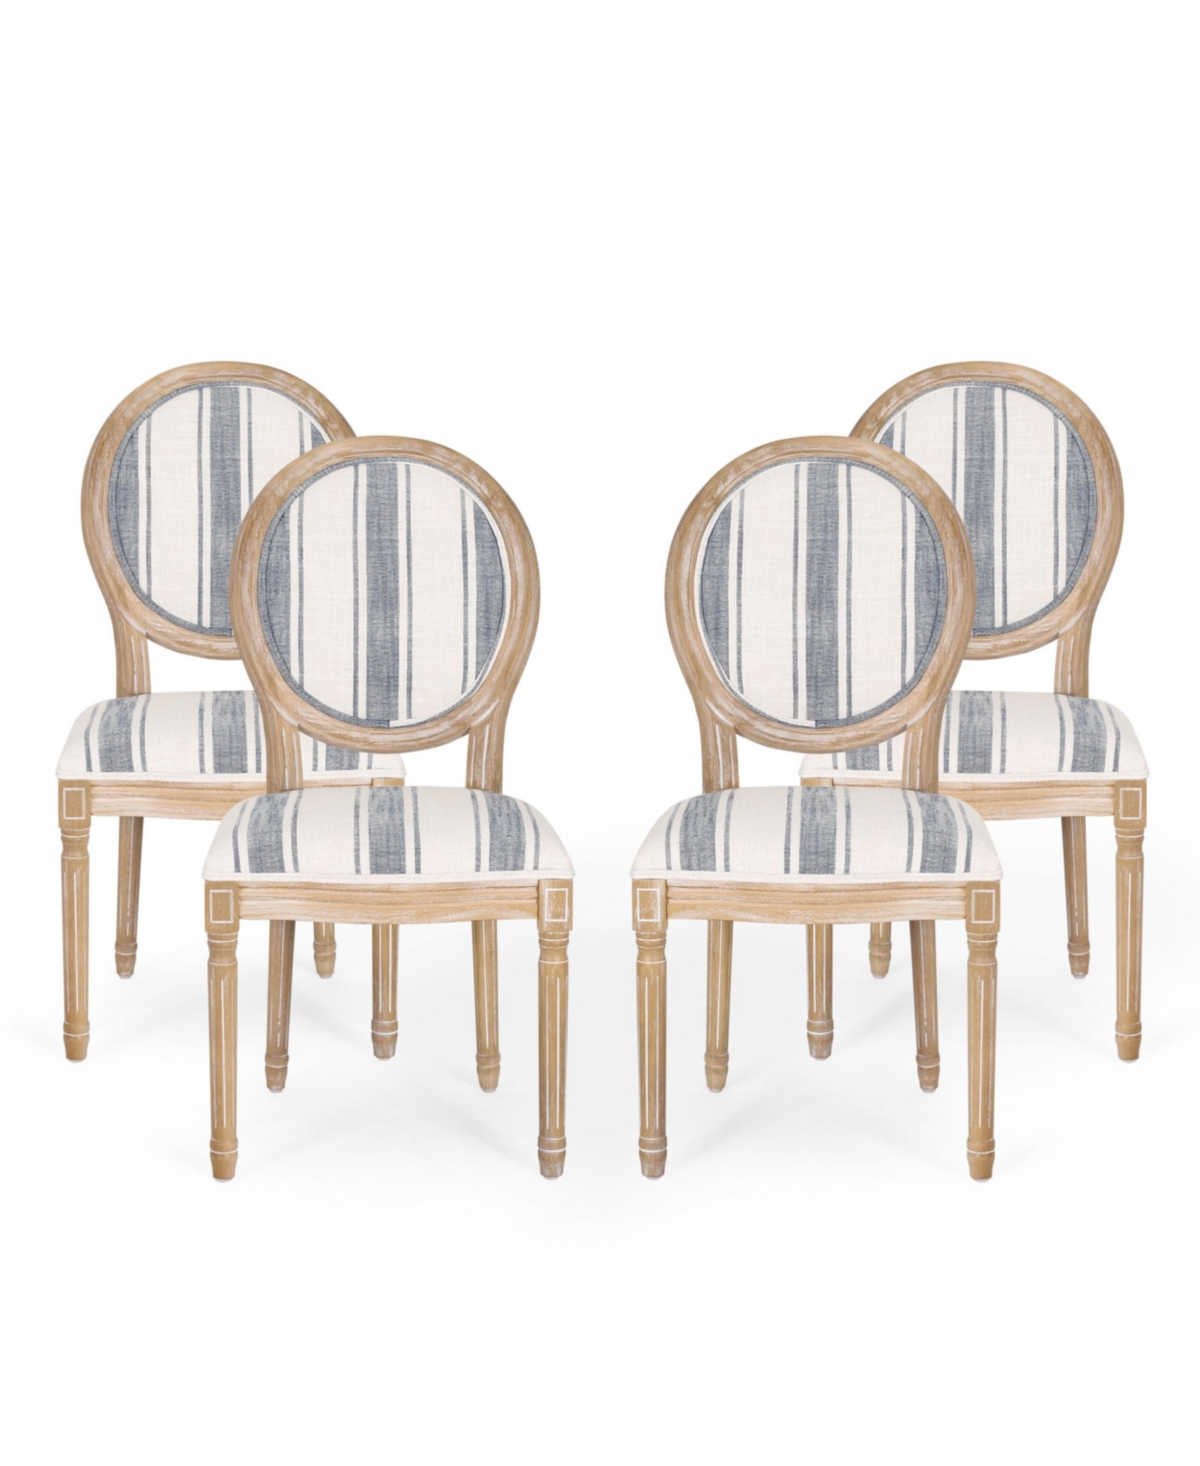 Noble House Phinnaeus French Country Dining Chairs Set, 4 Piece In Dark Blue Stripes And Light Beige